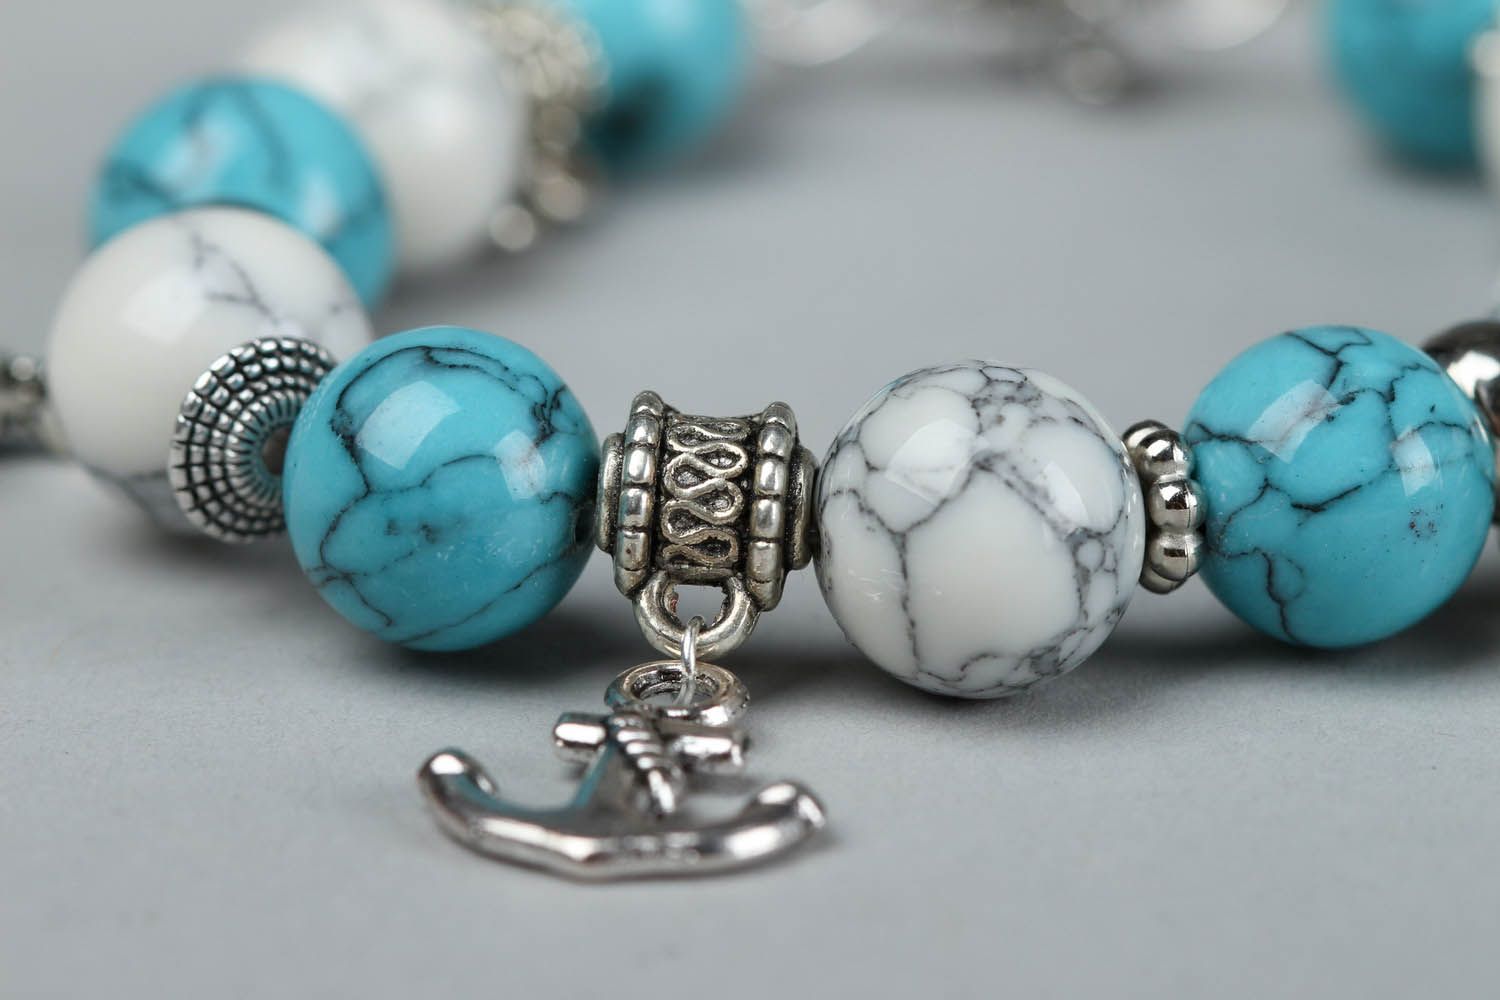 Bracelet with natural stones photo 3